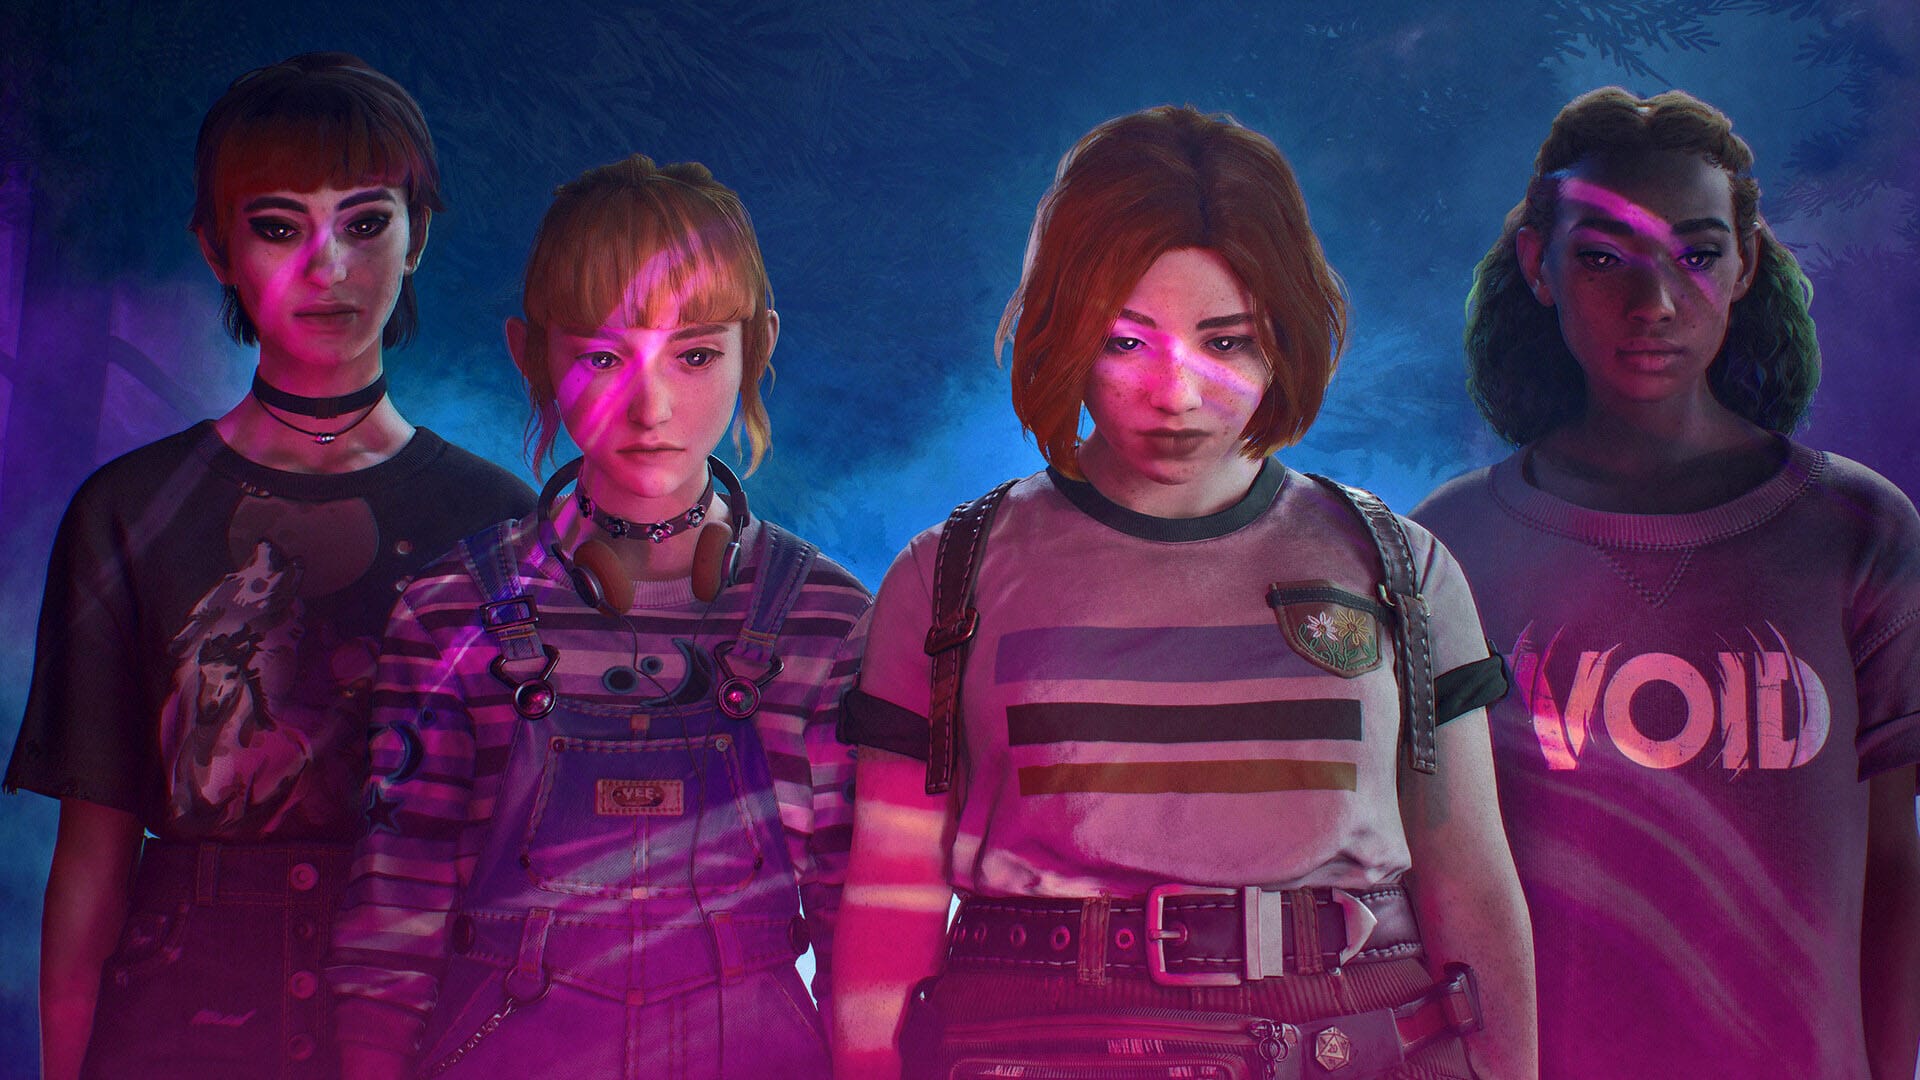 Lost Records: Bloom & Rage by Life is Strange Devs Is The First Game in a Much Larger Universe